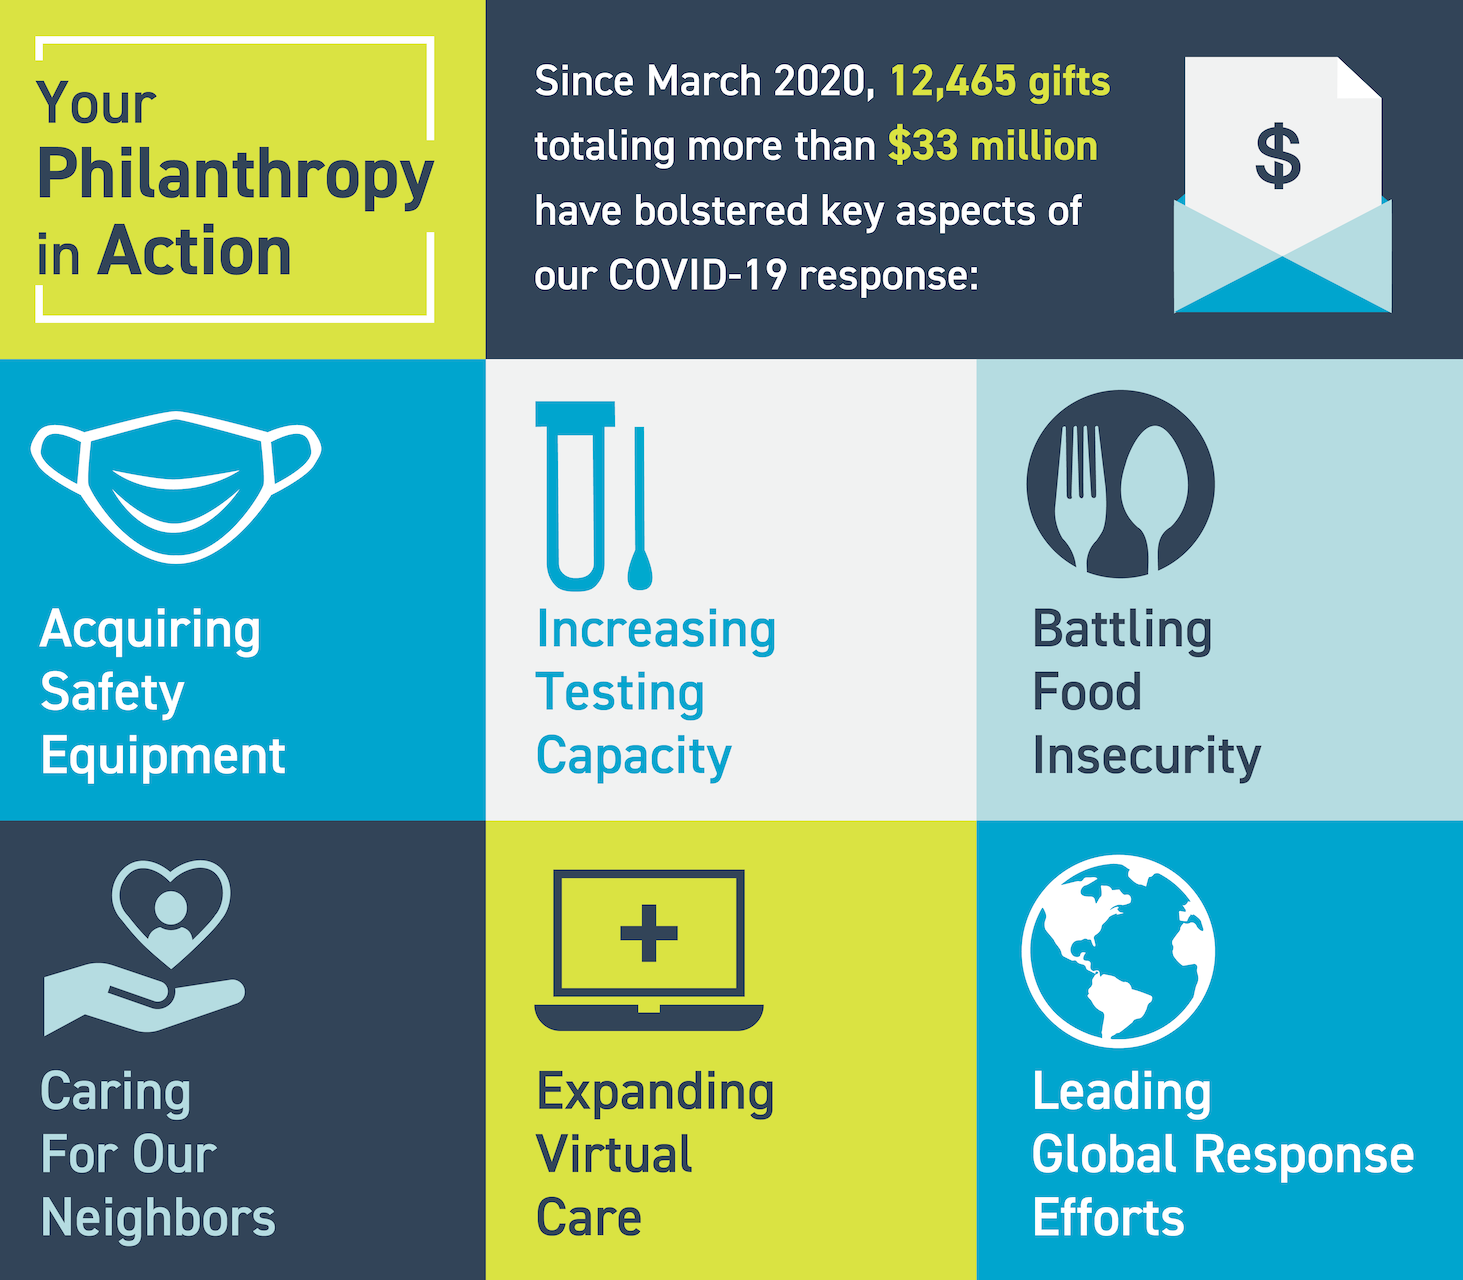 Your Philanthropy in Action infographic